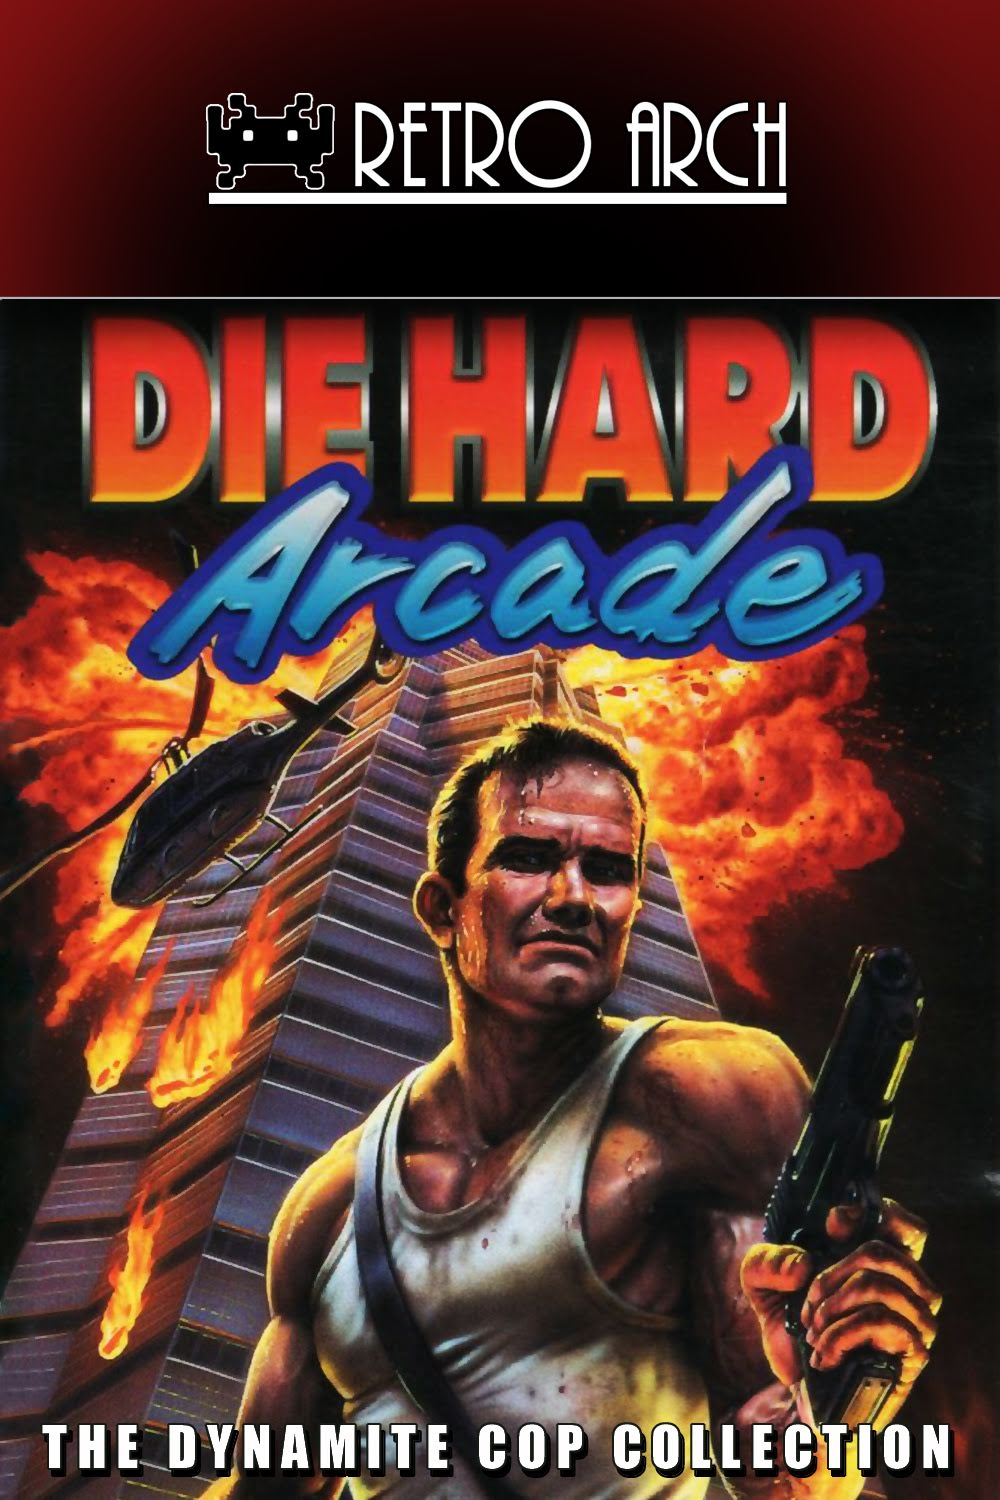 The Collection Chamber Die Hard Arcade The Dynamite Cop Collection